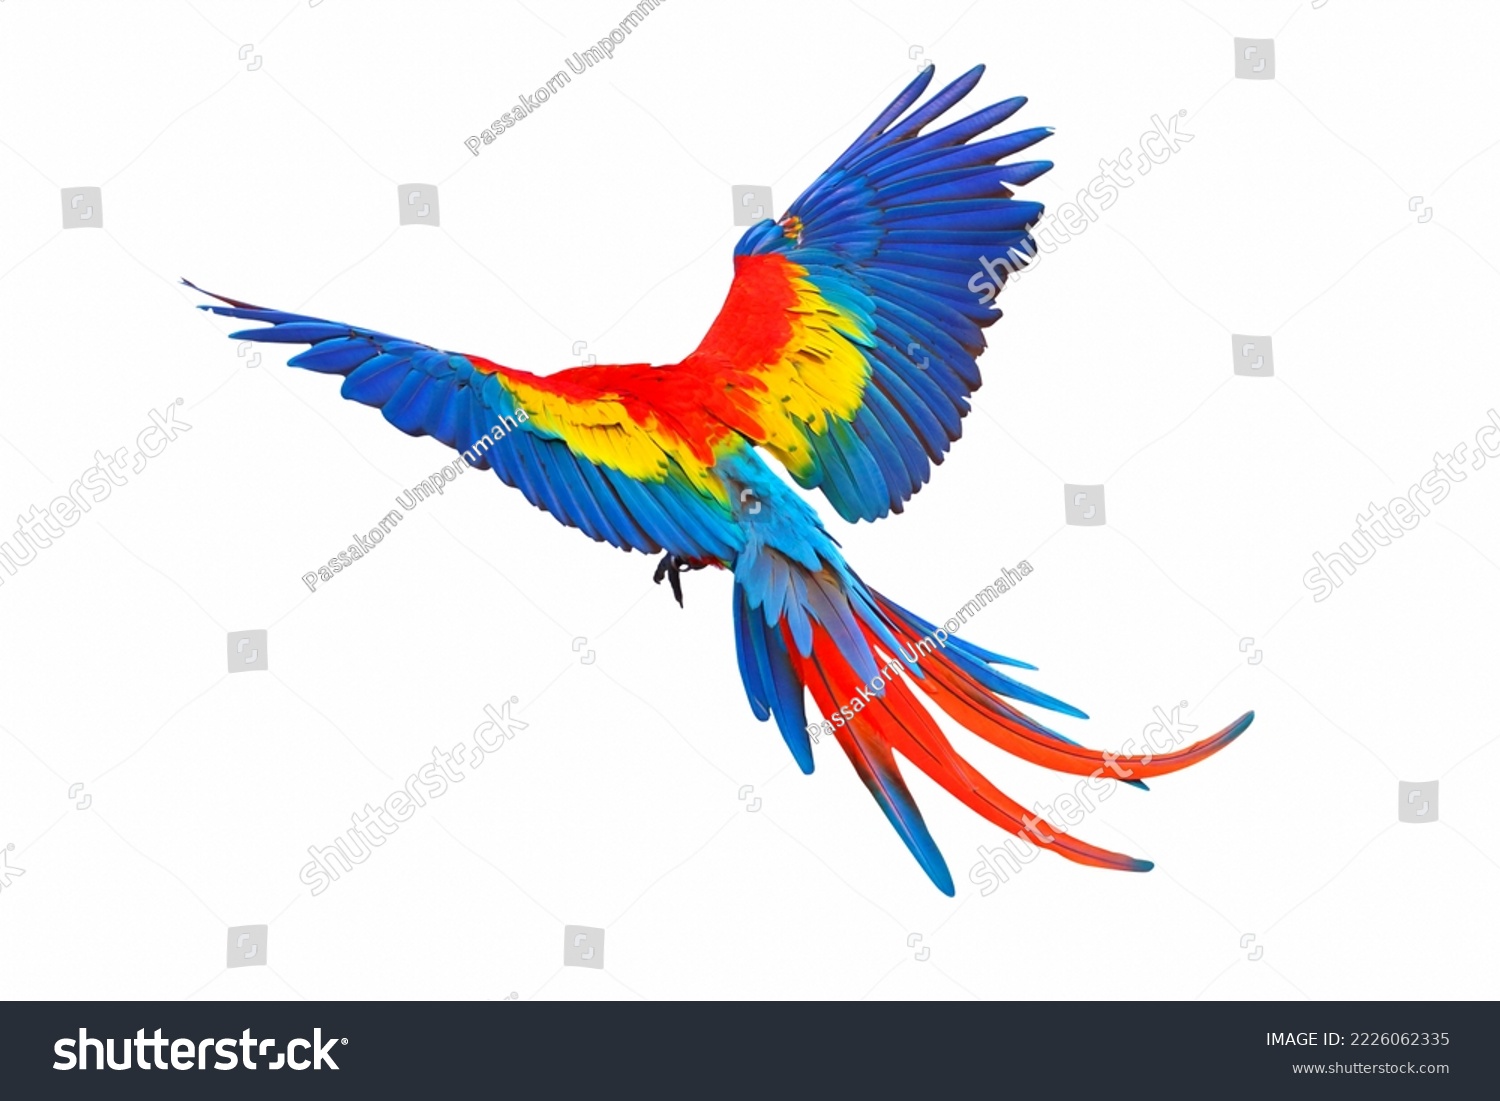 Colorful feathers on the back of macaw parrot. Scarlet macaw parrot  #2226062335